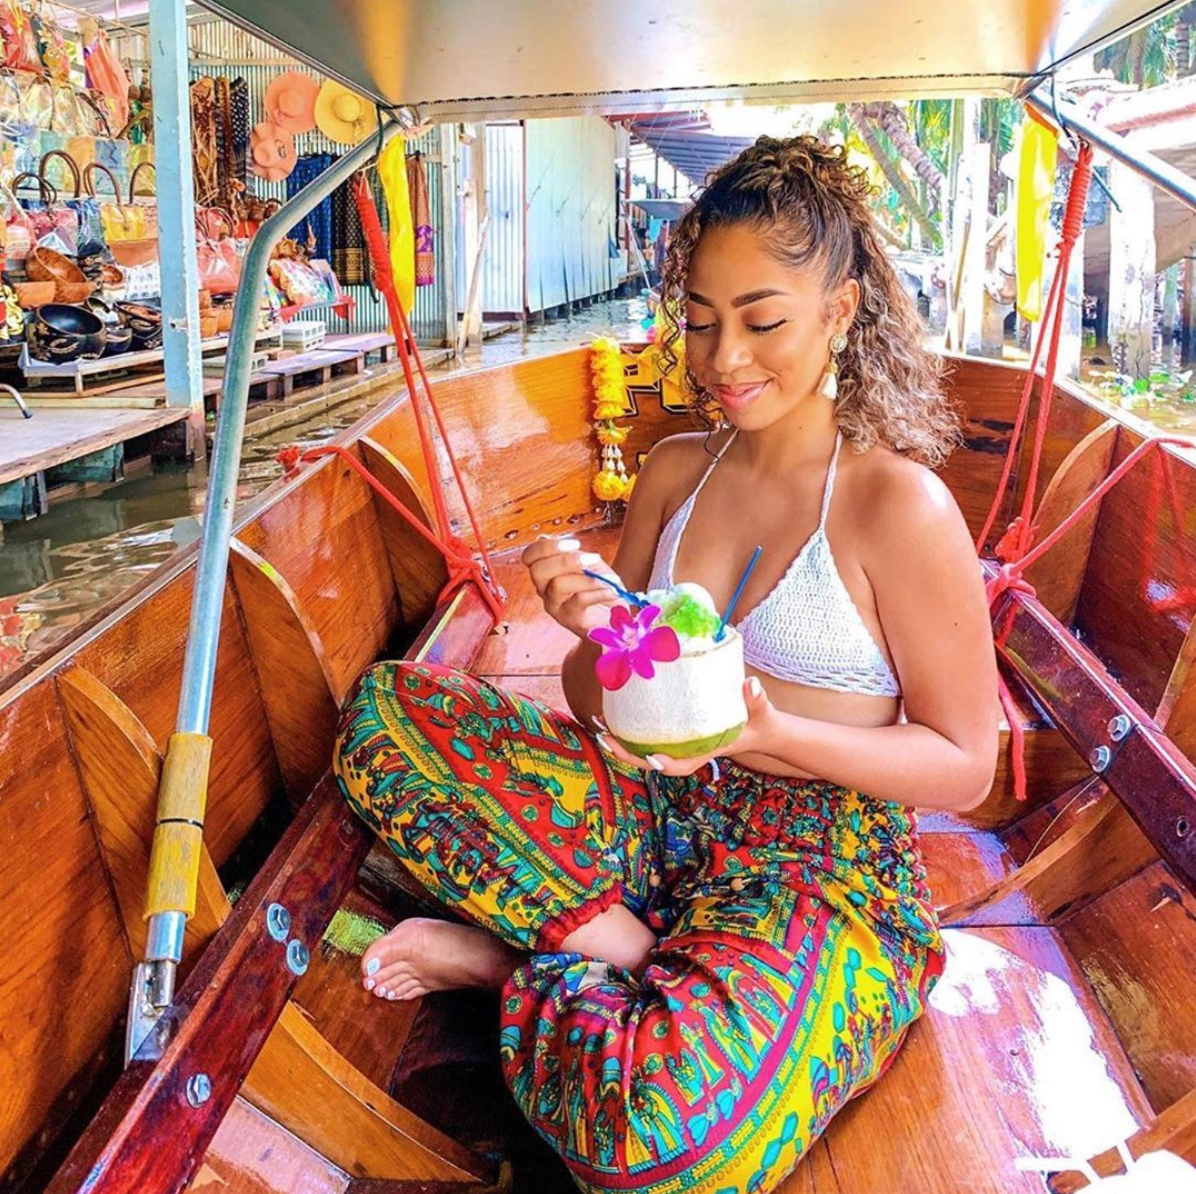 16 Times Black Travelers Were Thankful For Thailand